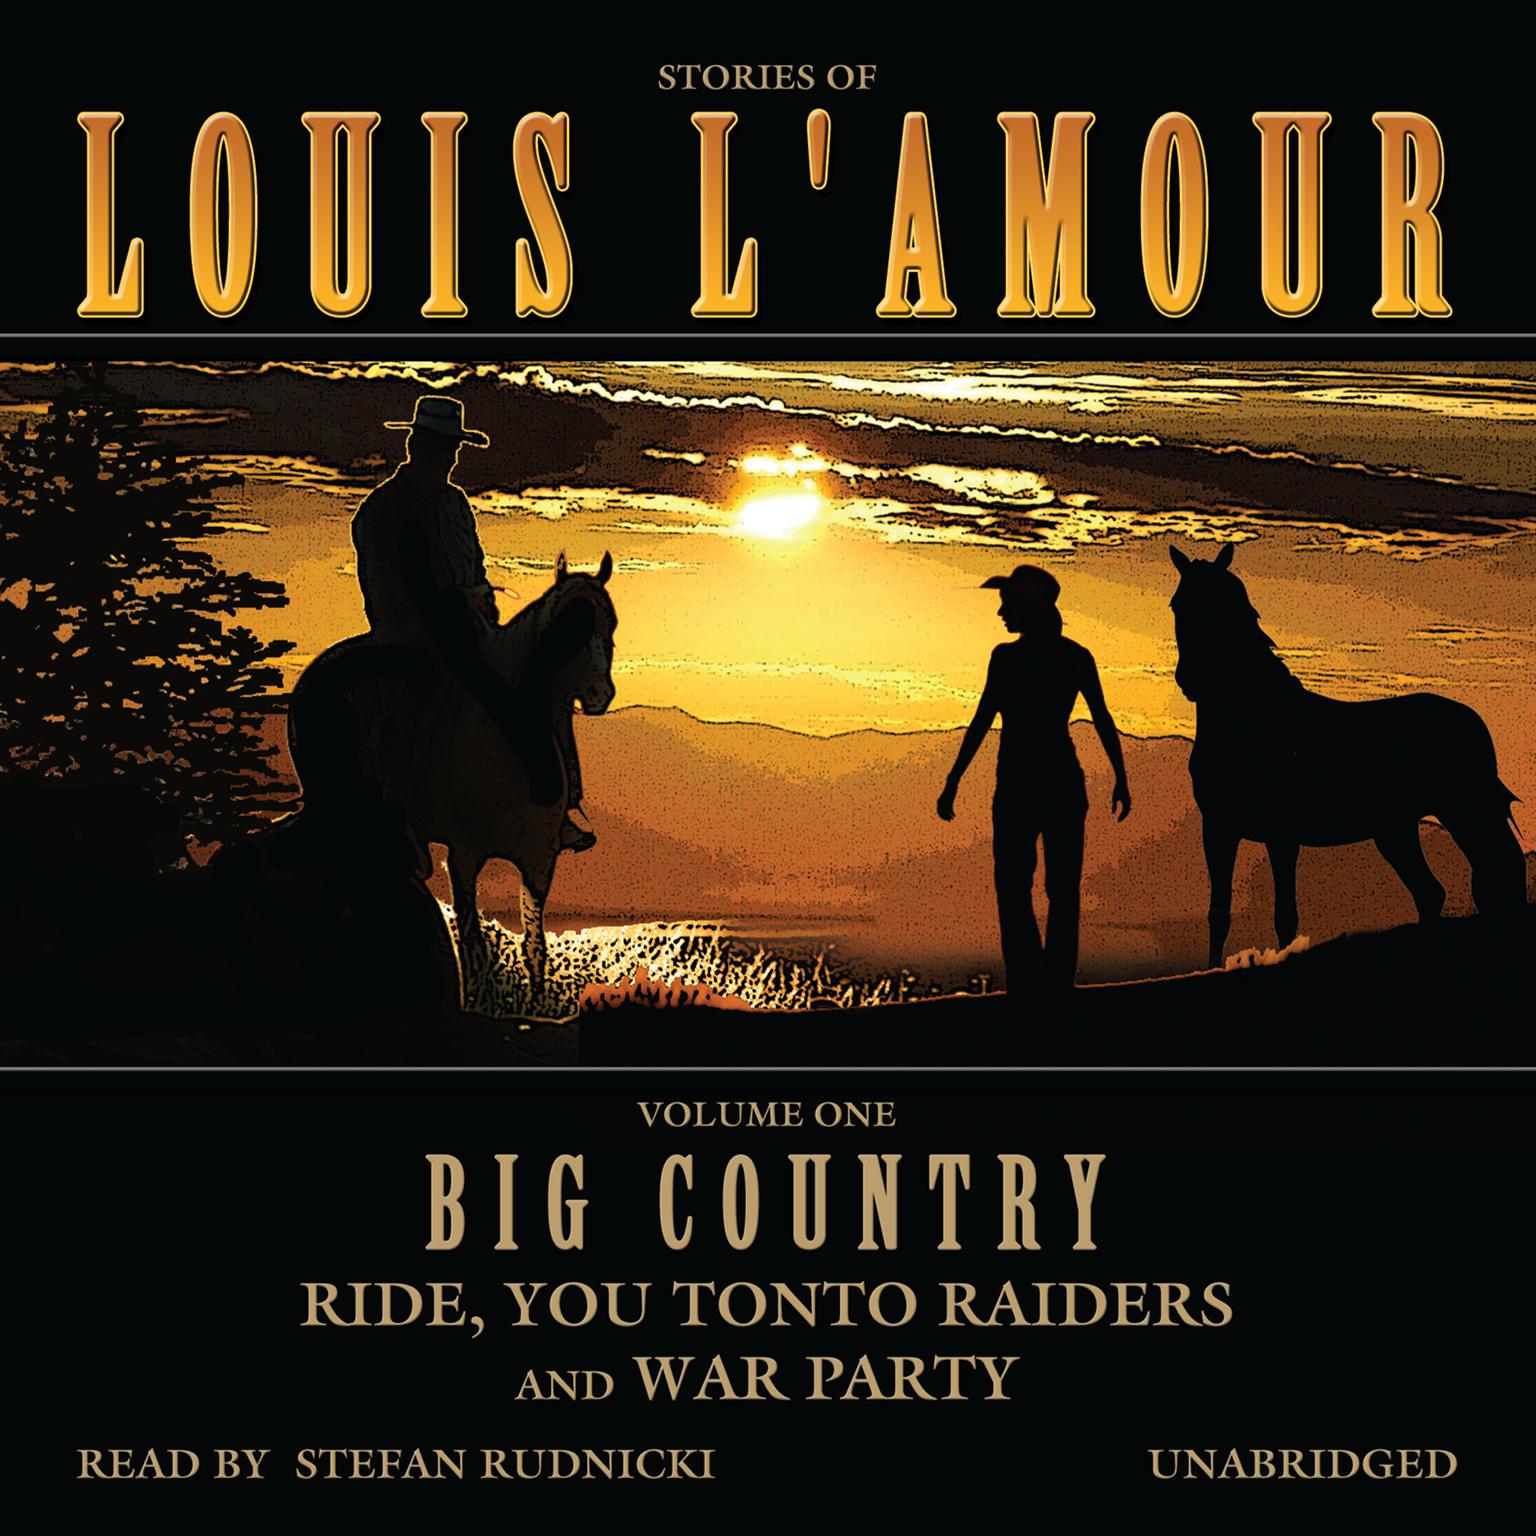 Big Country, Vol. 1: Stories of Louis L’Amour Audiobook, by Louis L’Amour